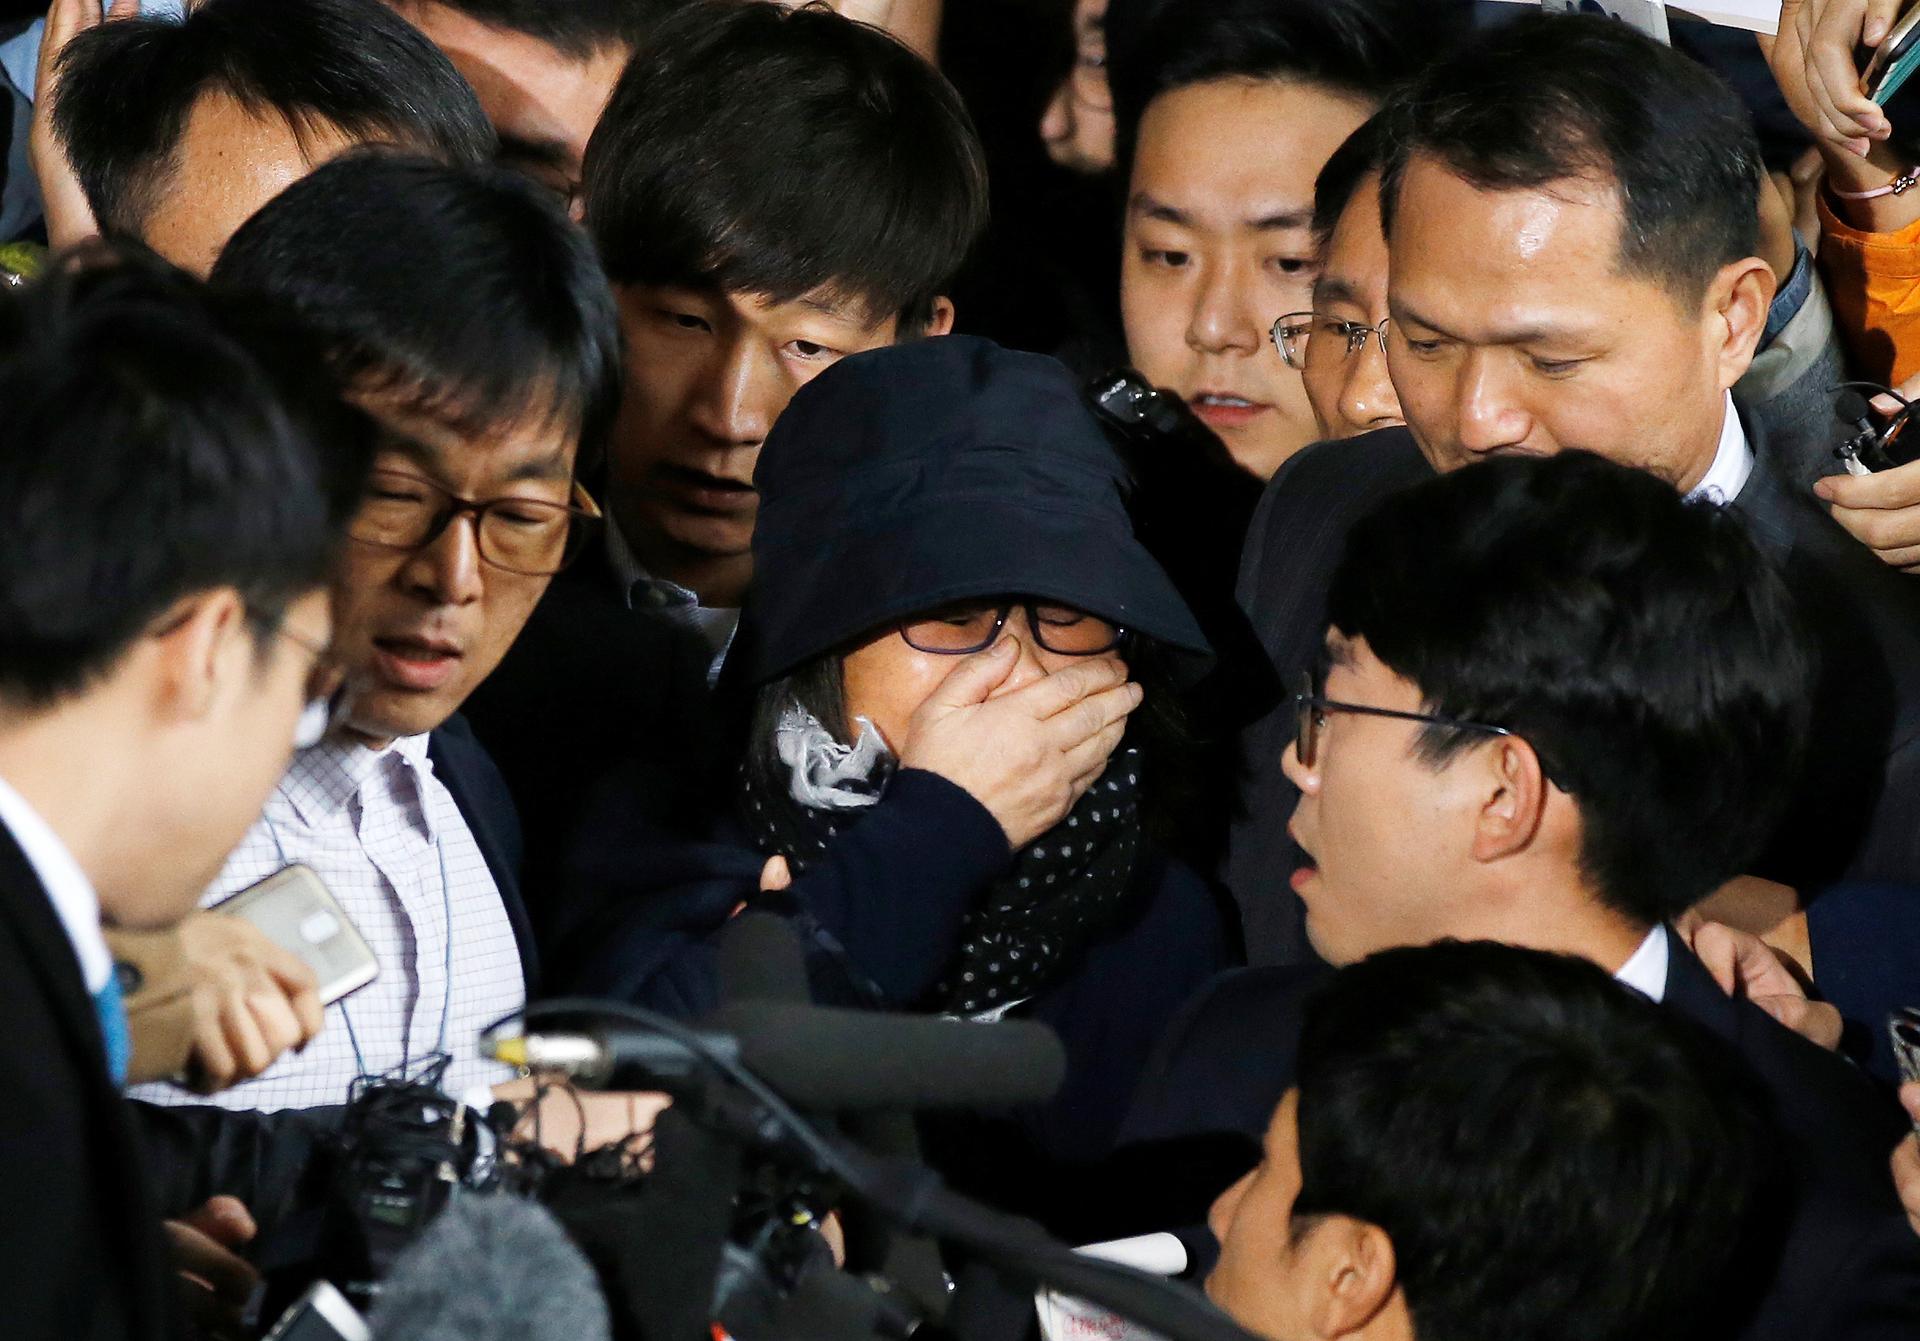 ​Choi Soon-sil (C), who is involved in a political scandal, reacts as she is surrounded by media upon her arrival at a prosecutor's office in Seoul, South Korea, October 31, 2016.